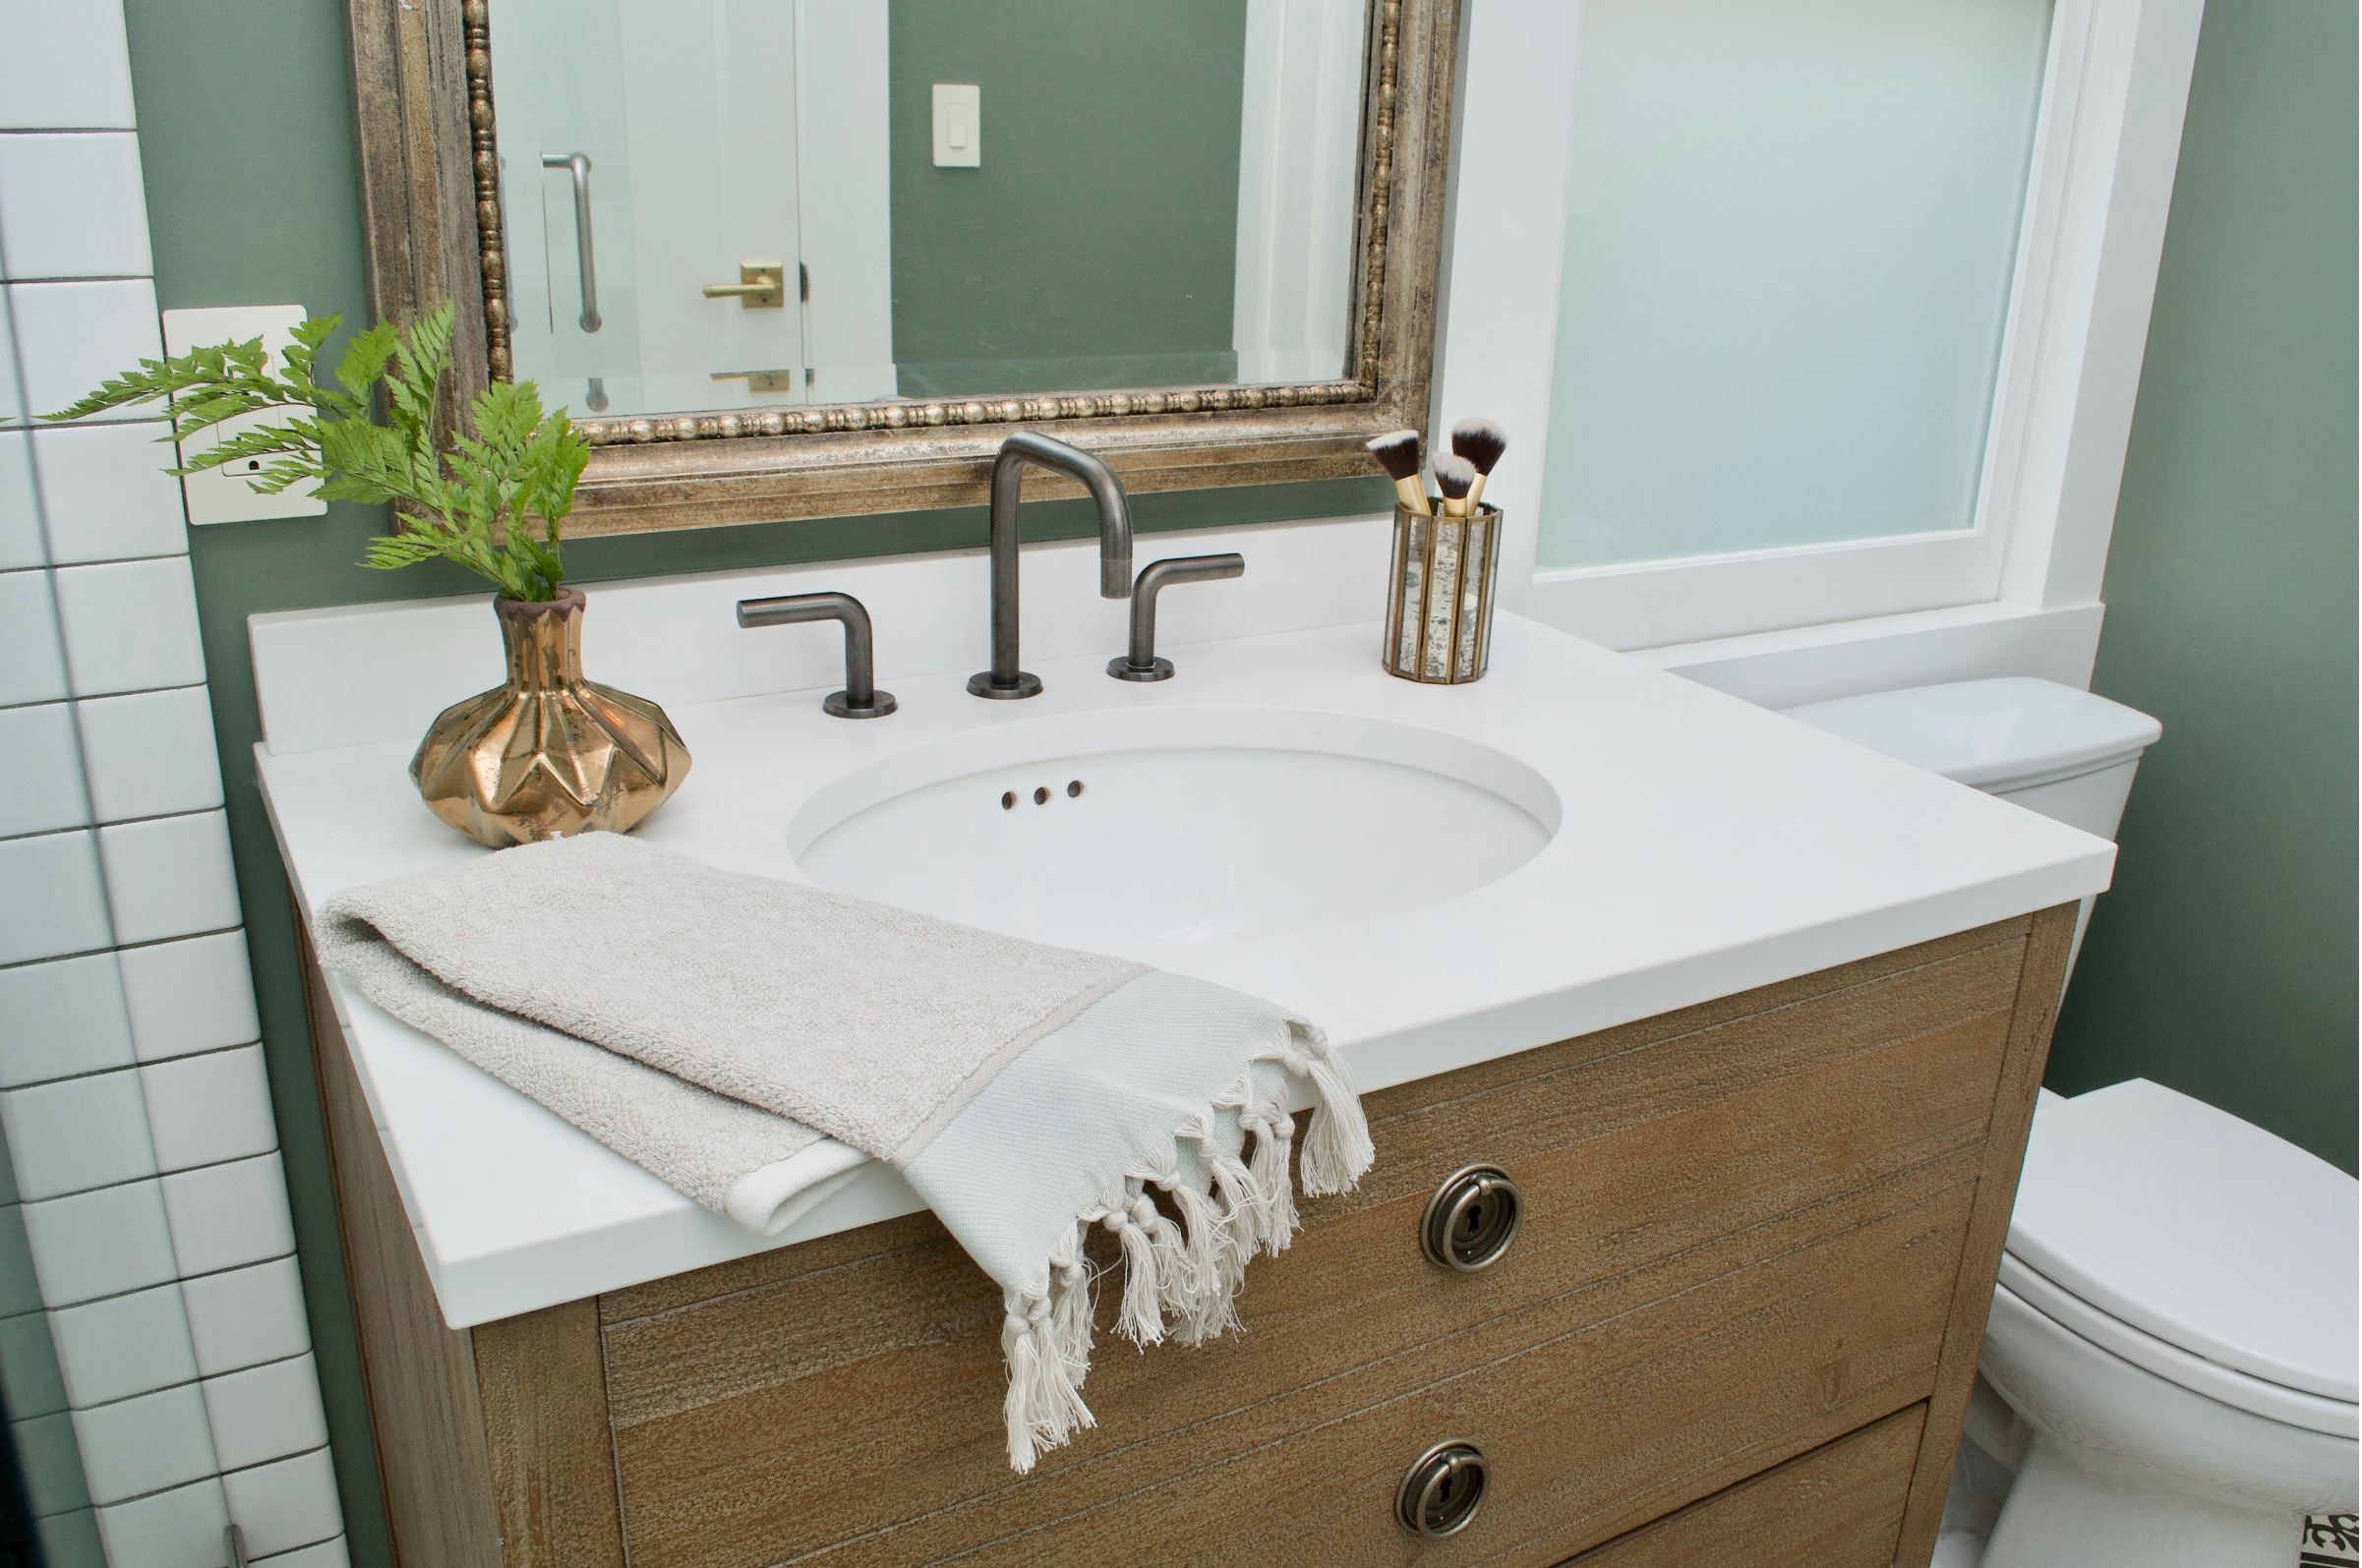 Start the new year with this sparkling green shade in your bathroom remodel